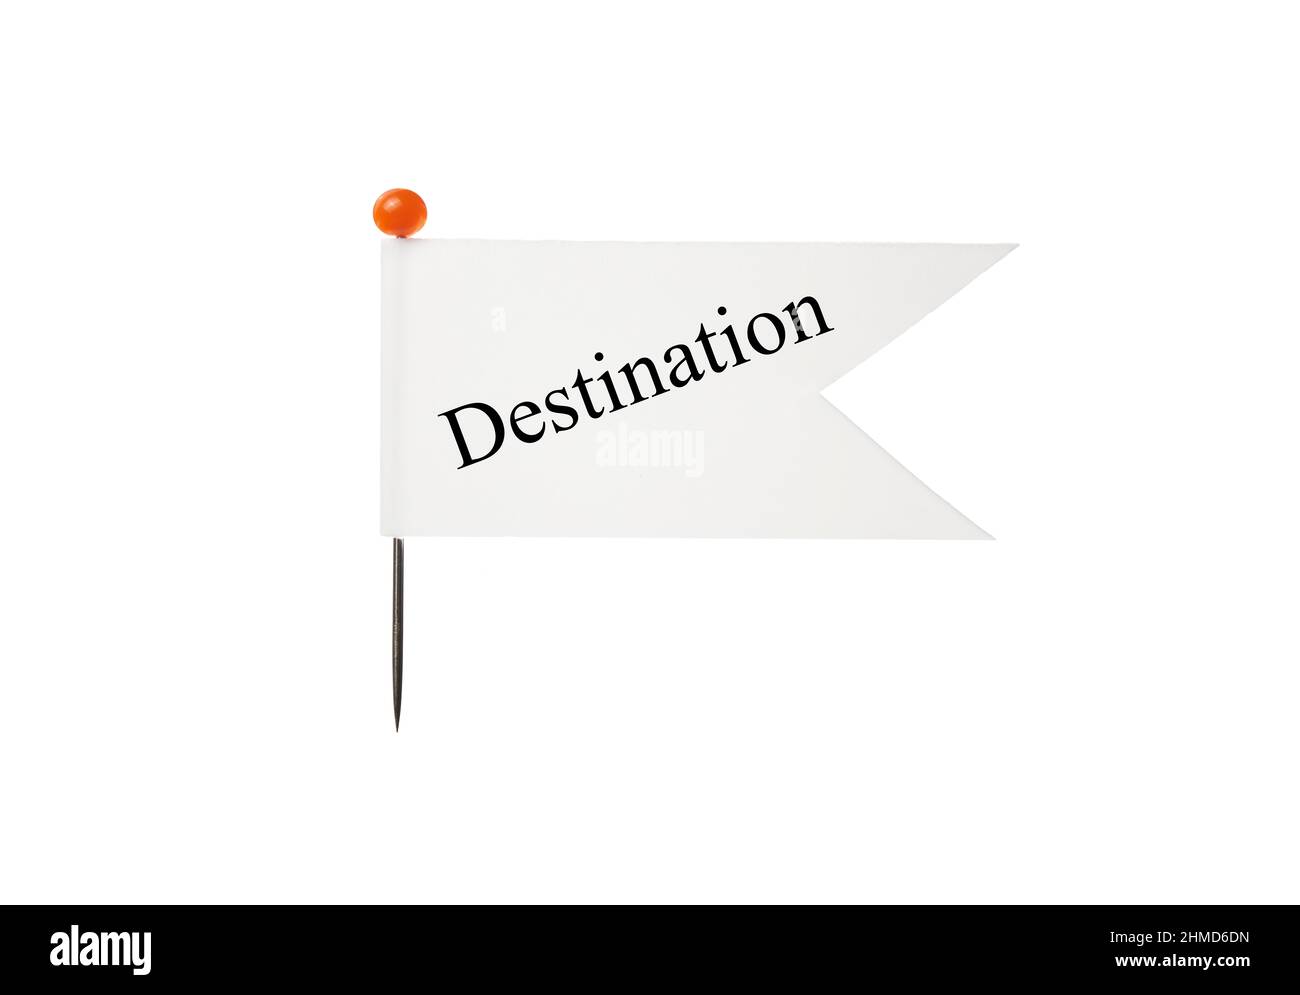 A flag with a white background that has the phrase Destination attached to a pin that has a red top in front of a plain white background Stock Photo